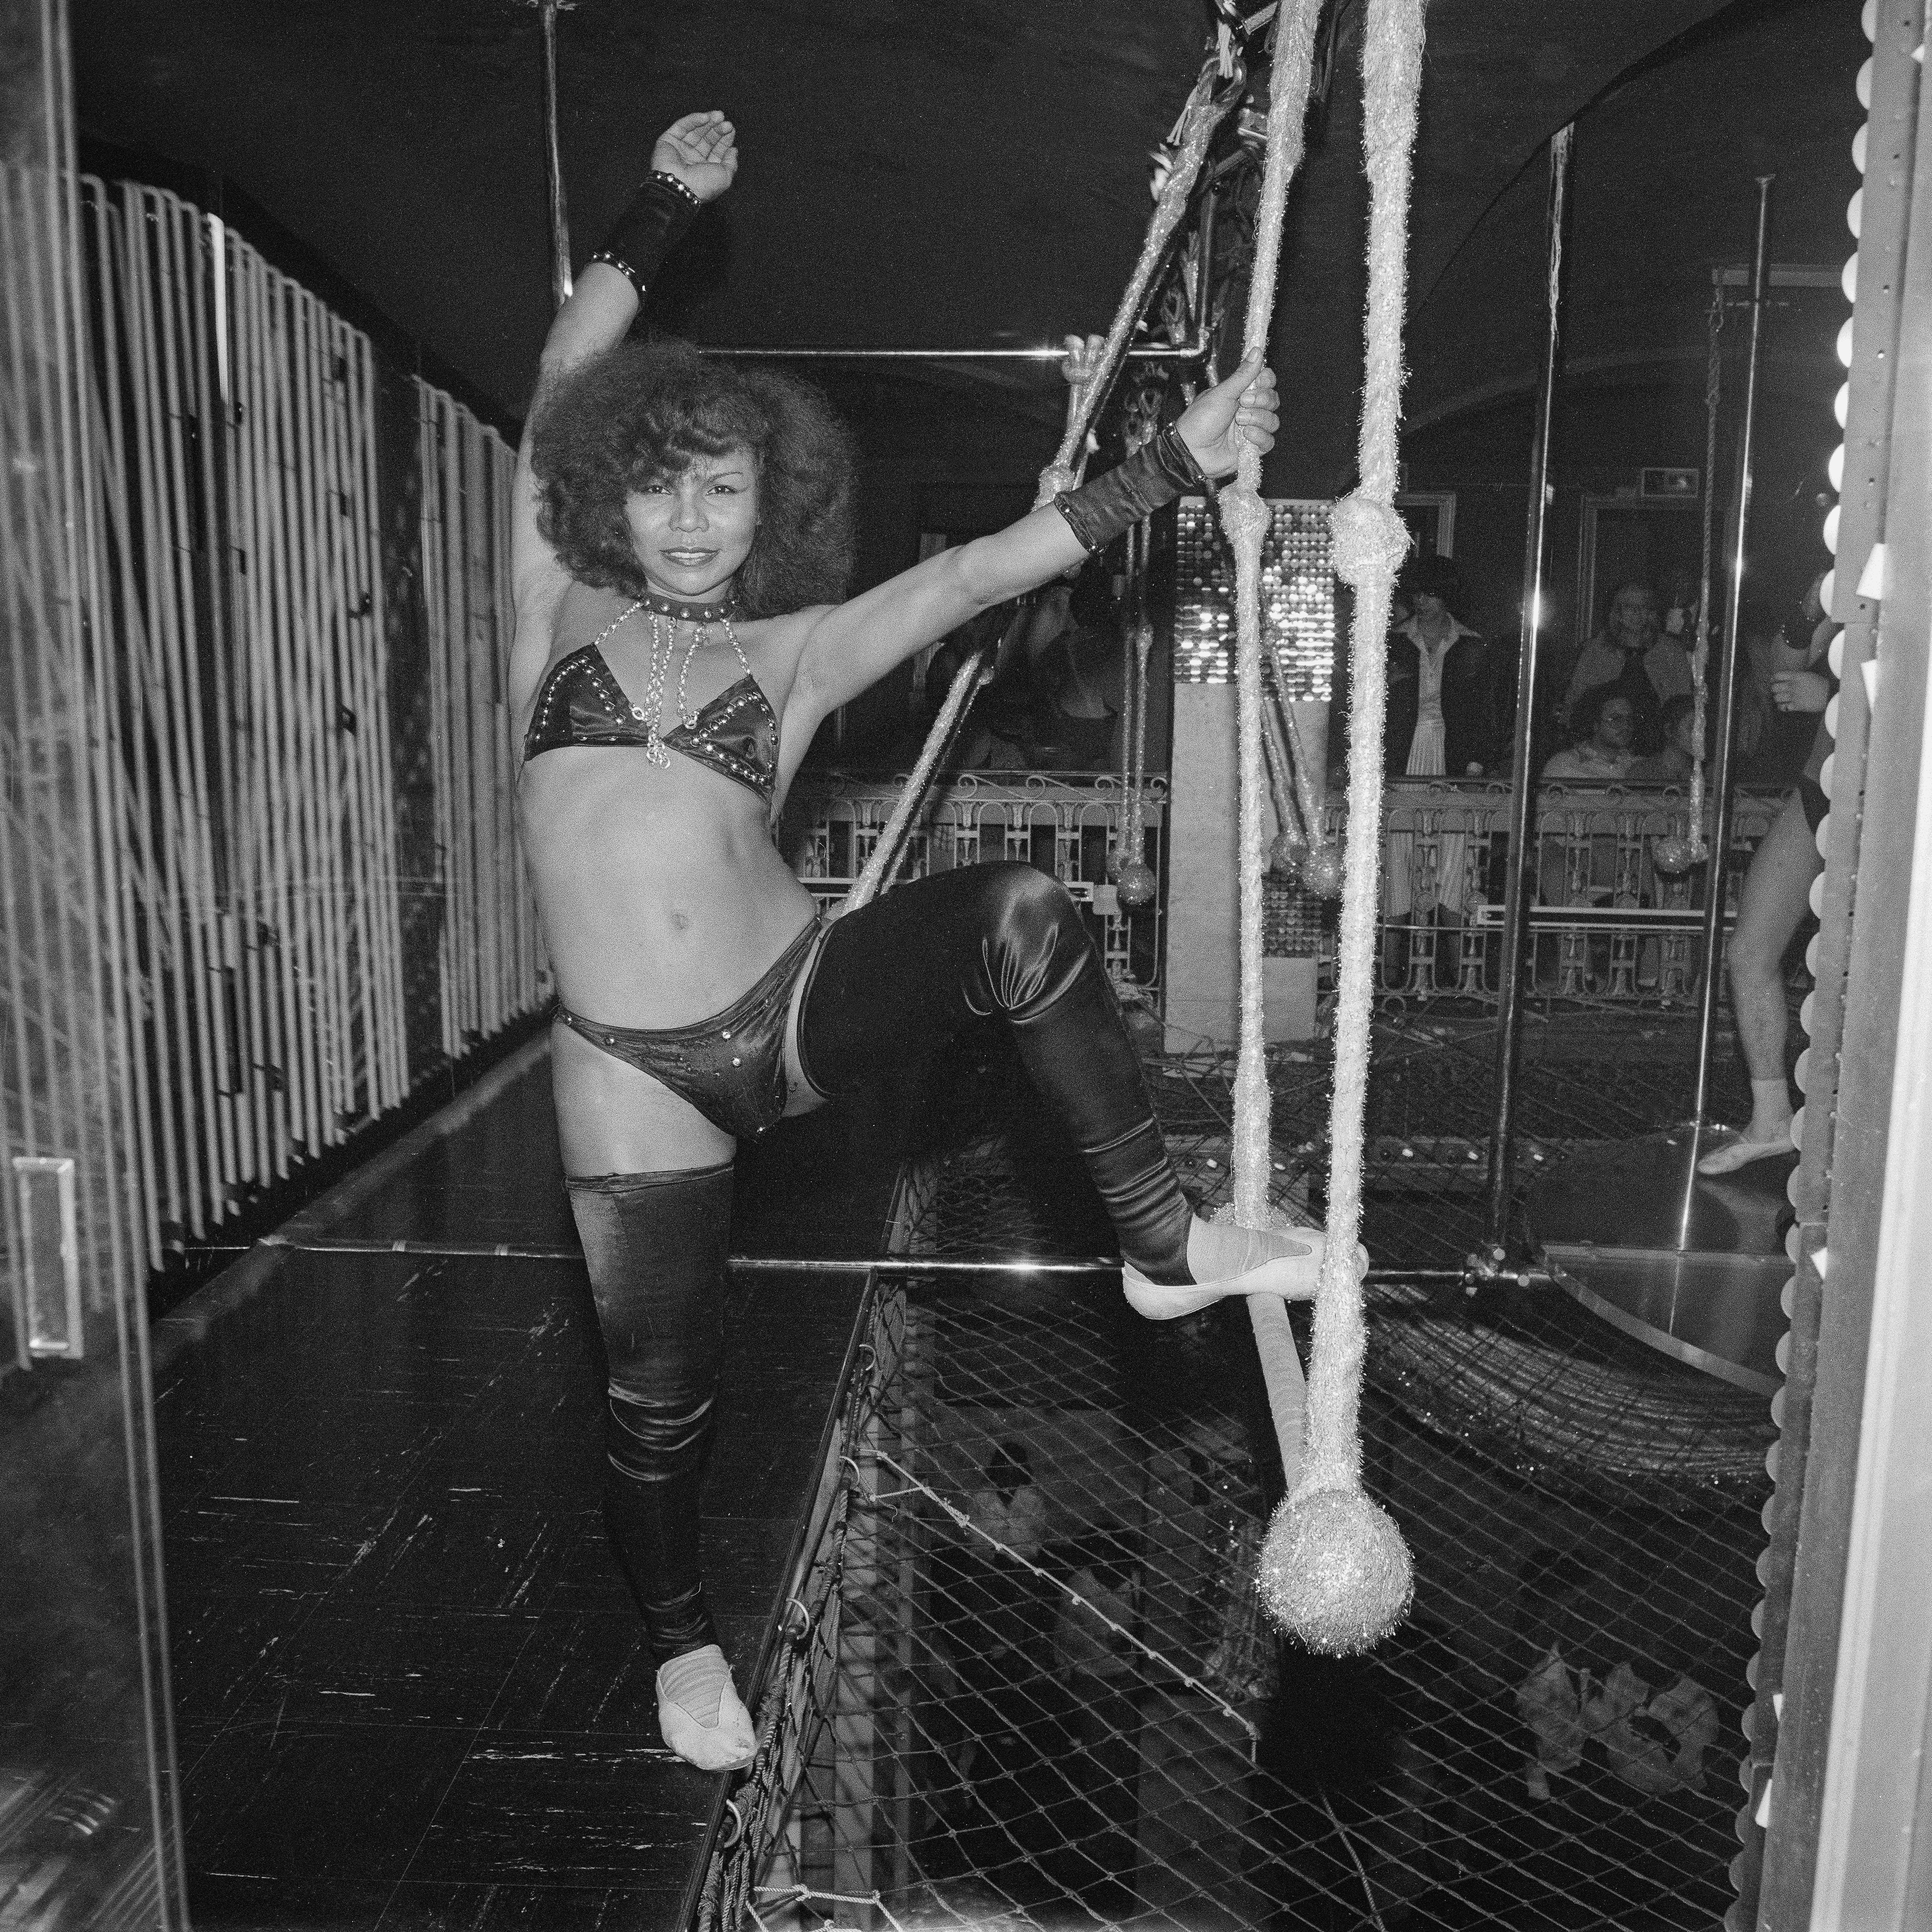 QuirkyVision 45RPM - Trapeze Artist on A Night We Were Rejected from Studio 54